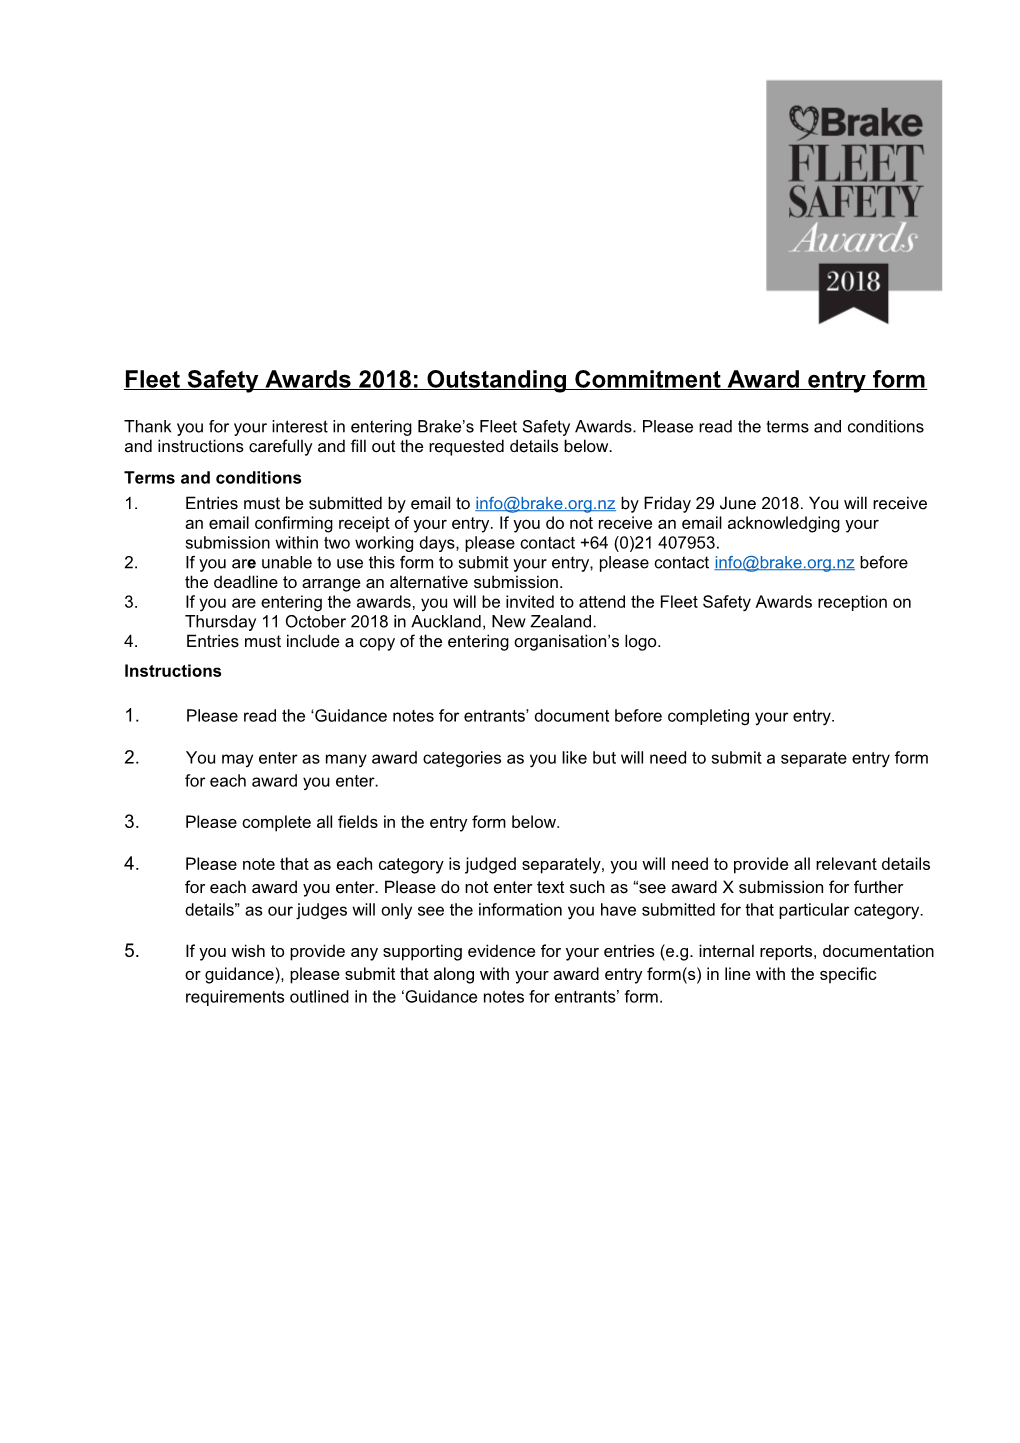 Fleet Safety Awards 2018: Outstanding Commitment Award Entry Form